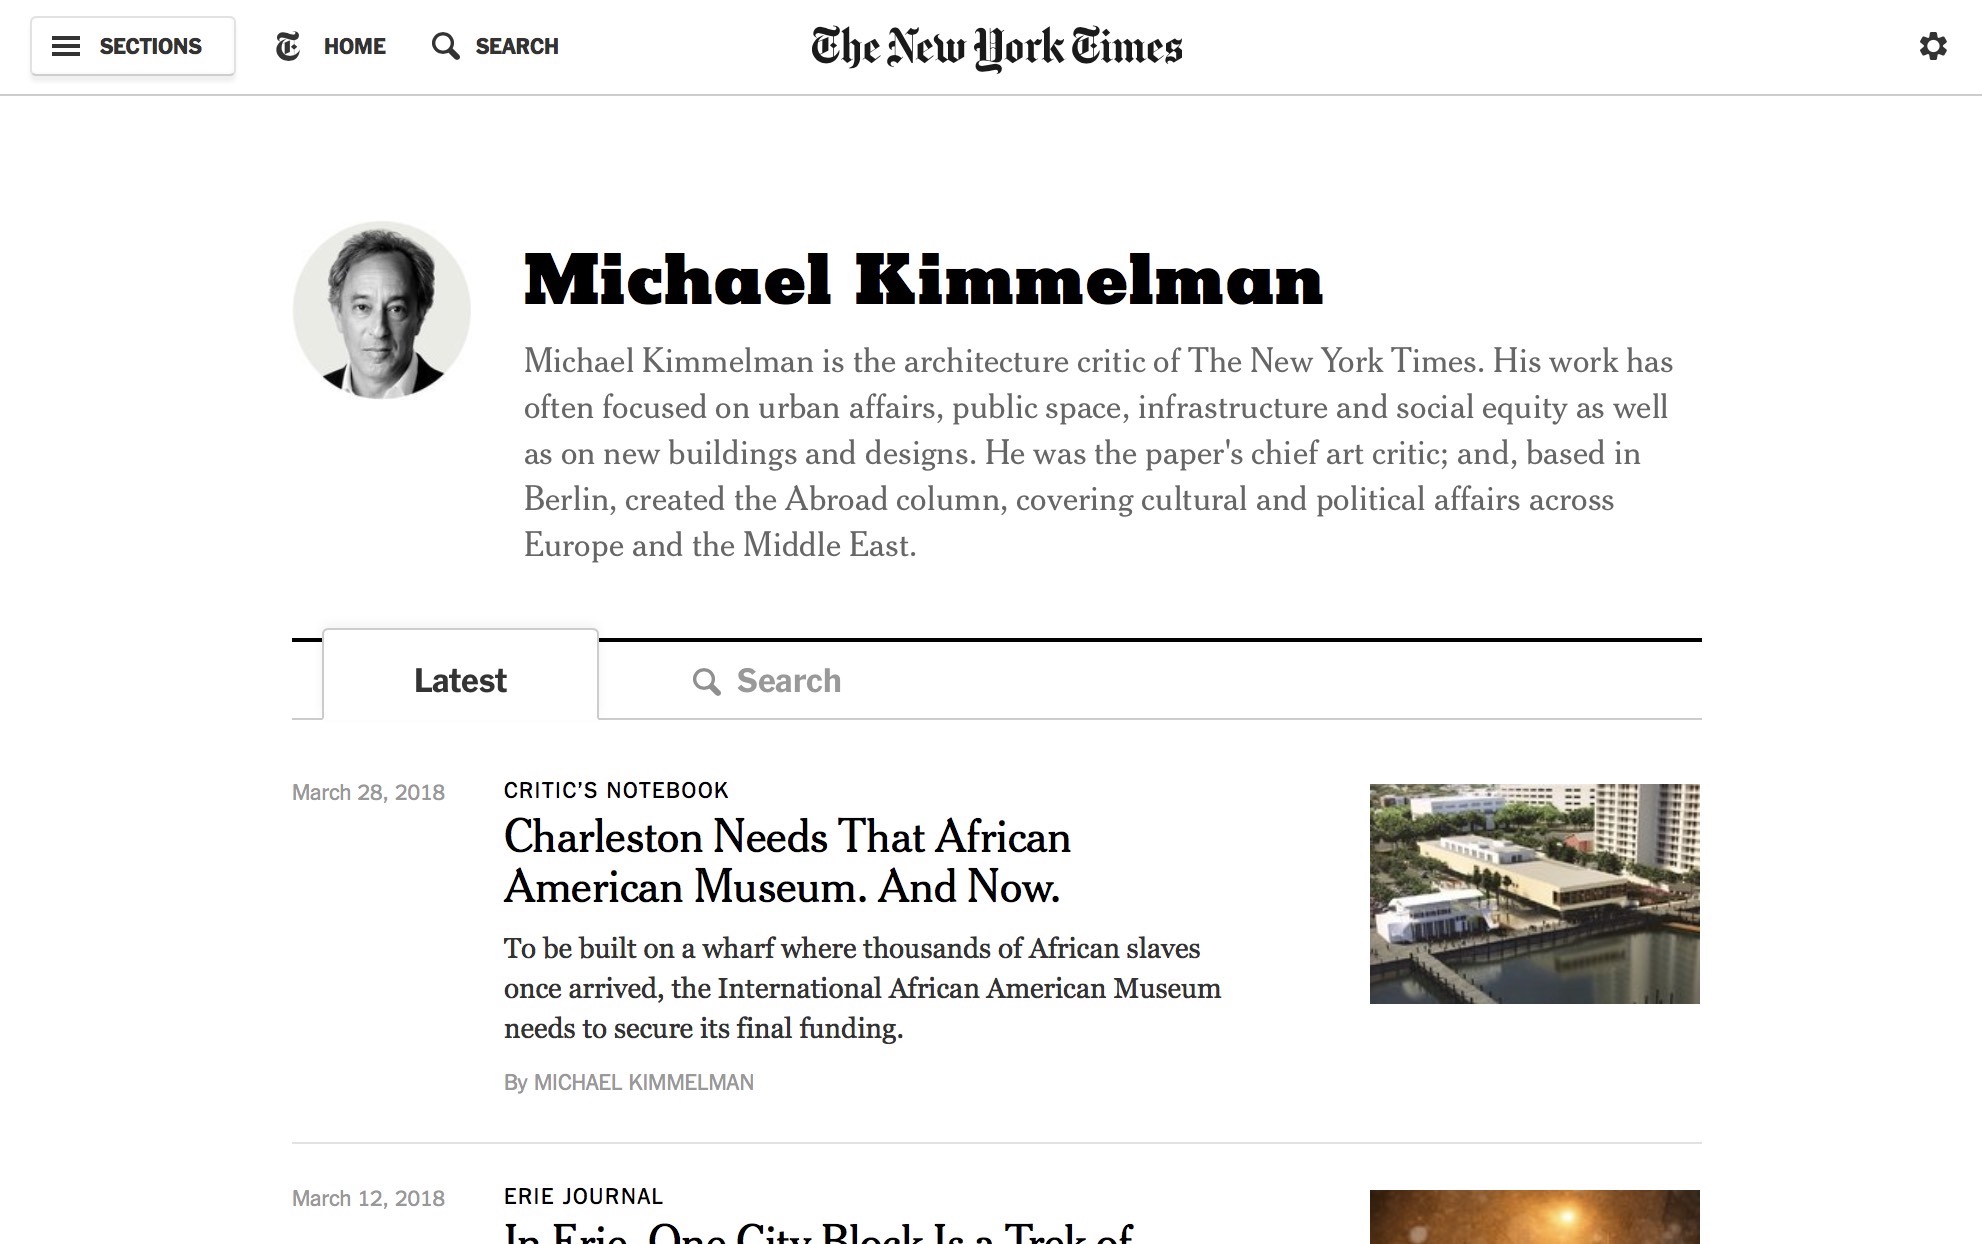 Michael Kimmelman from The New York Times